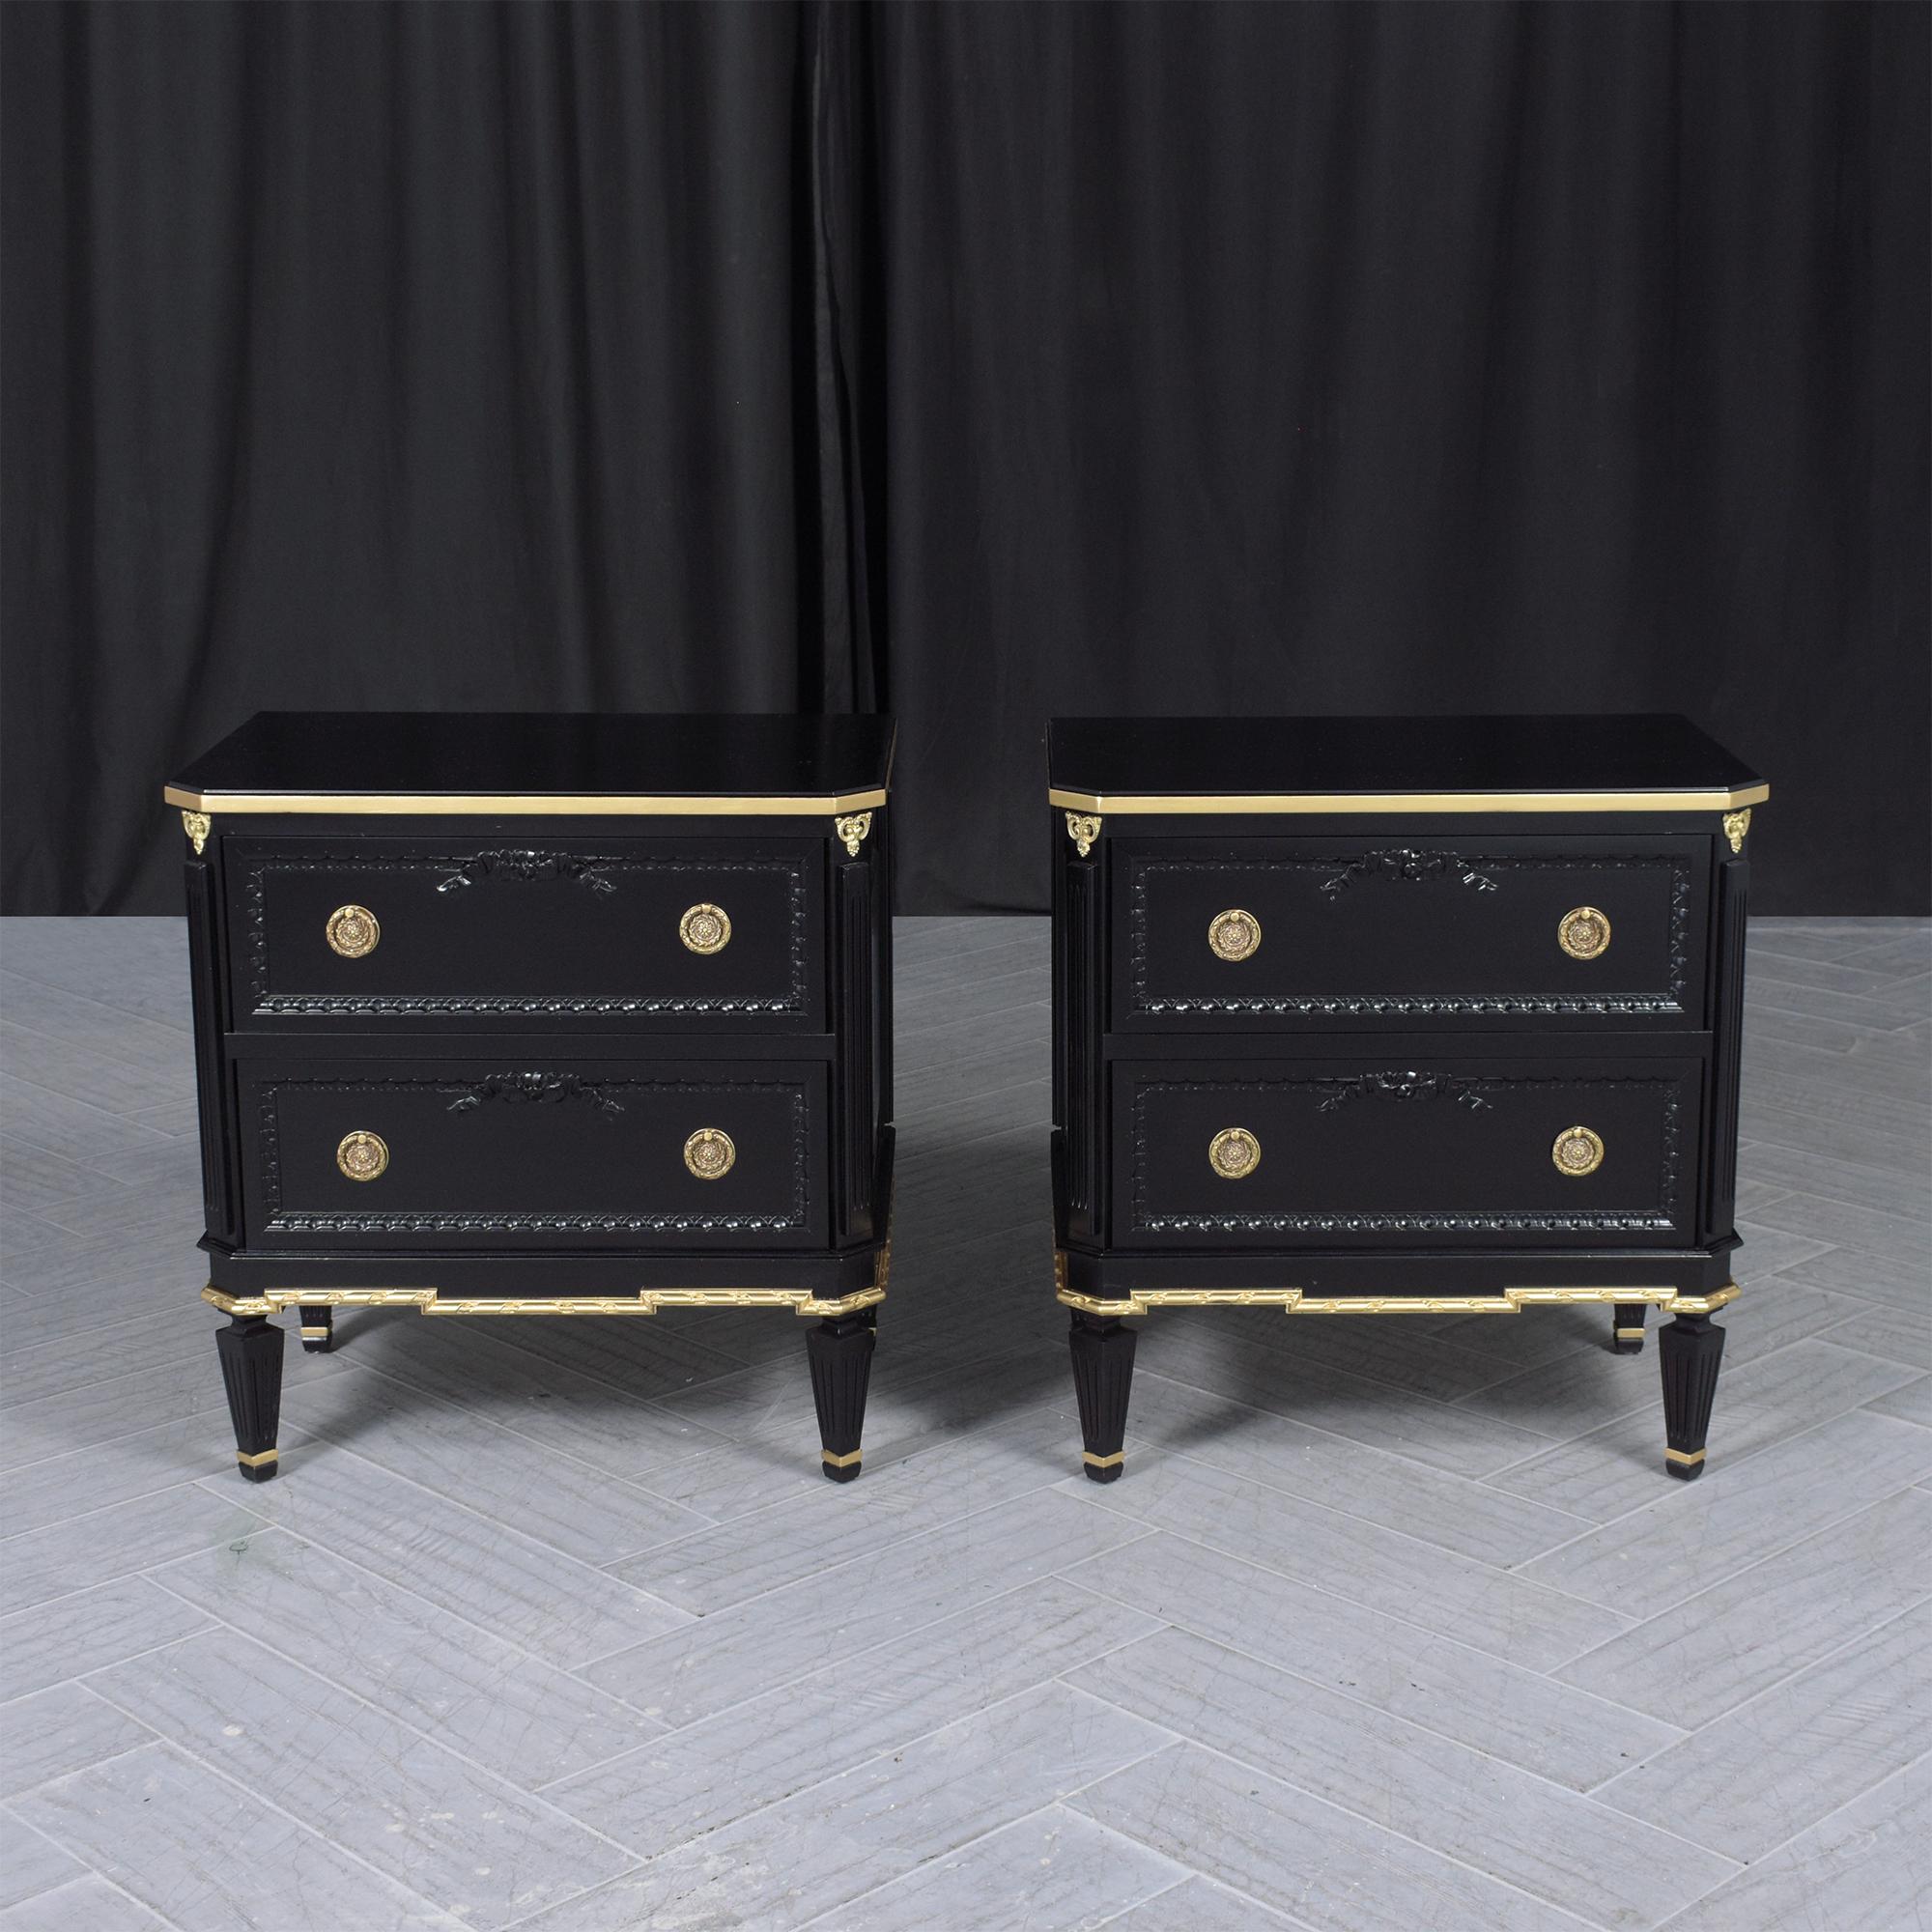 Italian Vintage Louis XVI Mahogany Commodes: Timeless Nightstands for the Modern Home